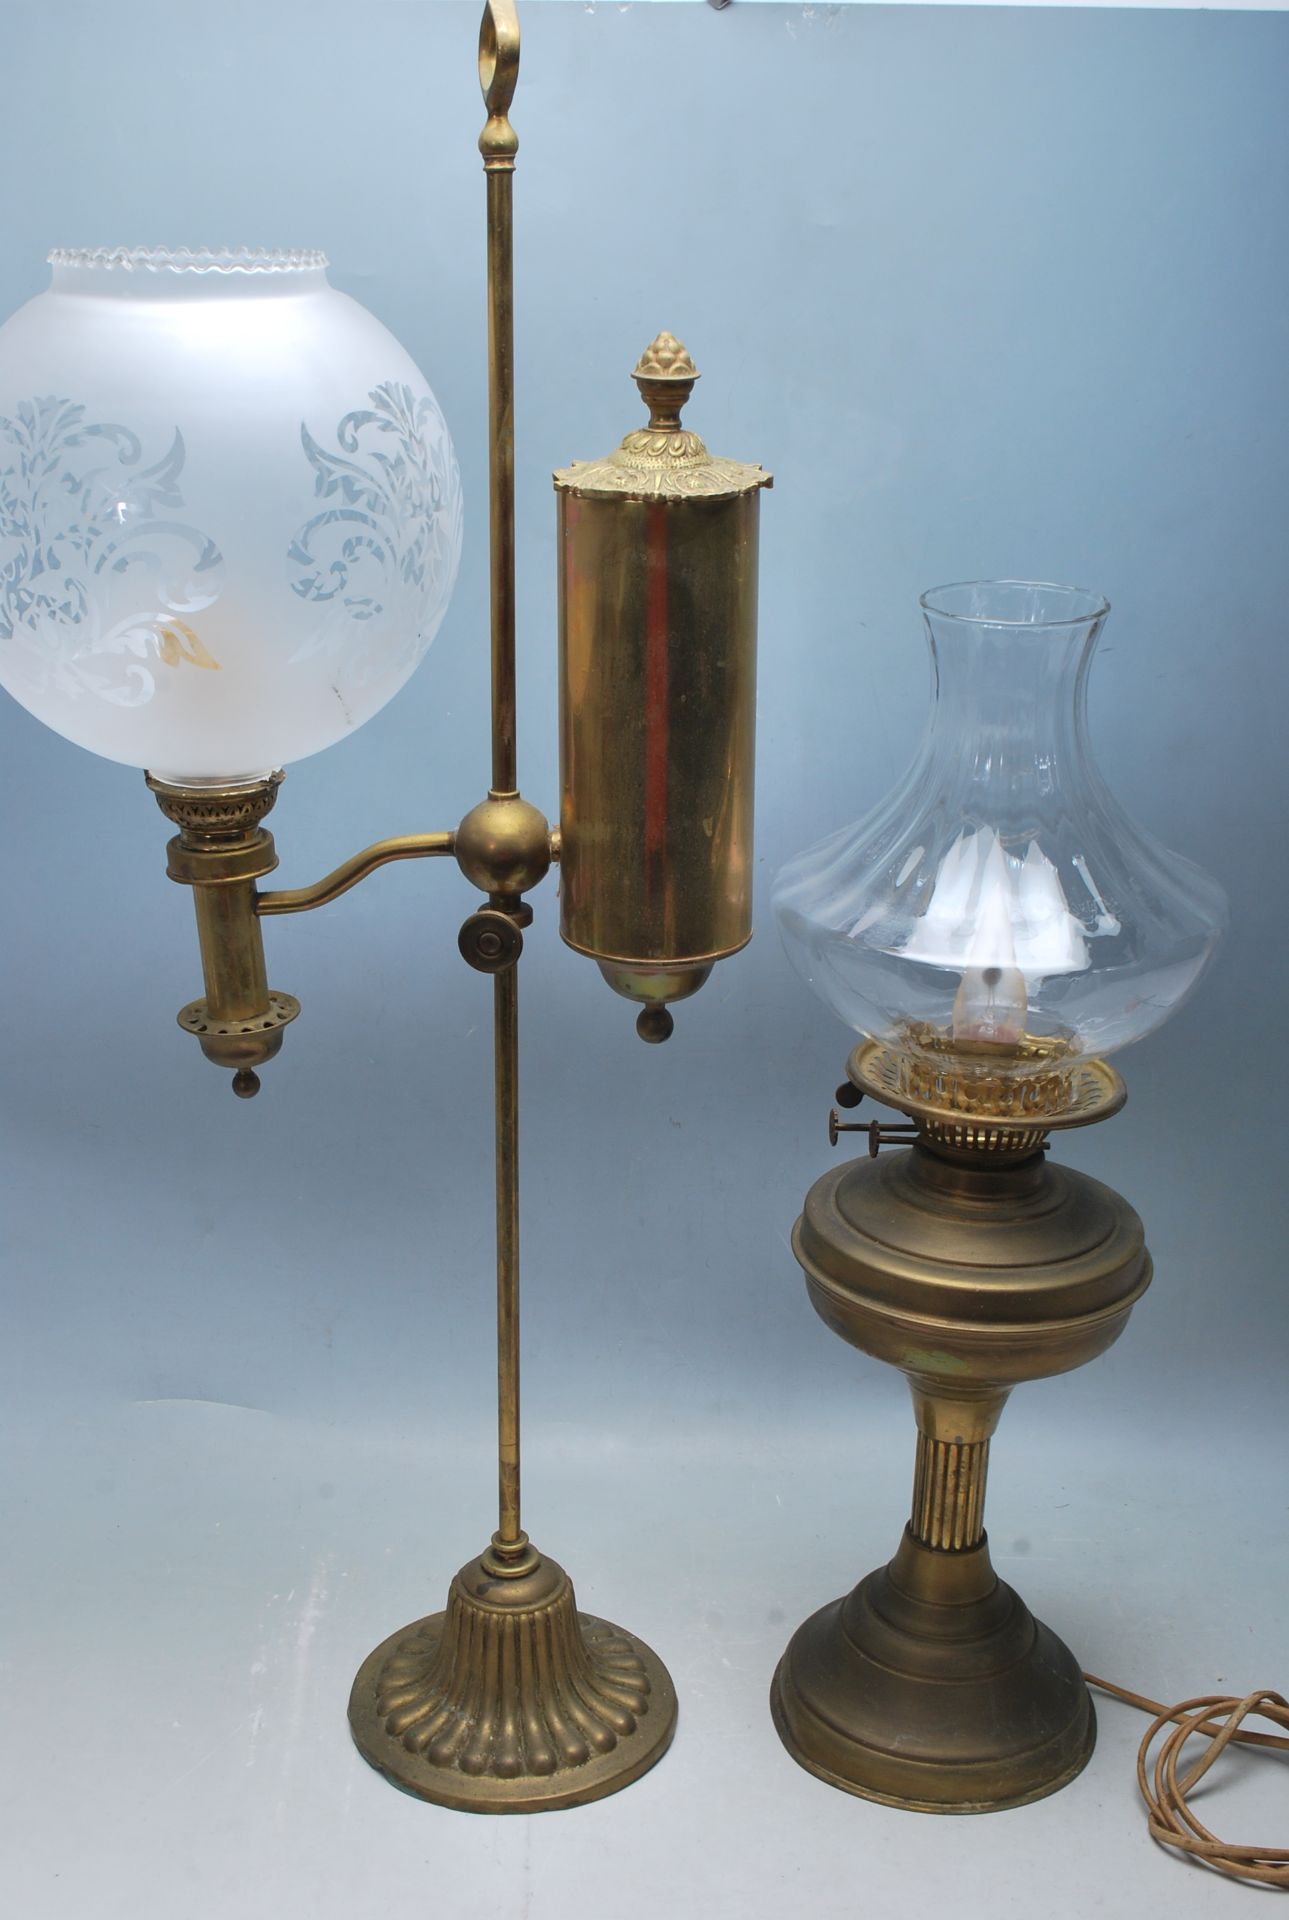 TWO 20TH CENTURY ANTIQUE STYLE BRASS OIL LAMPS CONVERTED TO ELECTRICAL LAMPS / LIGHTS